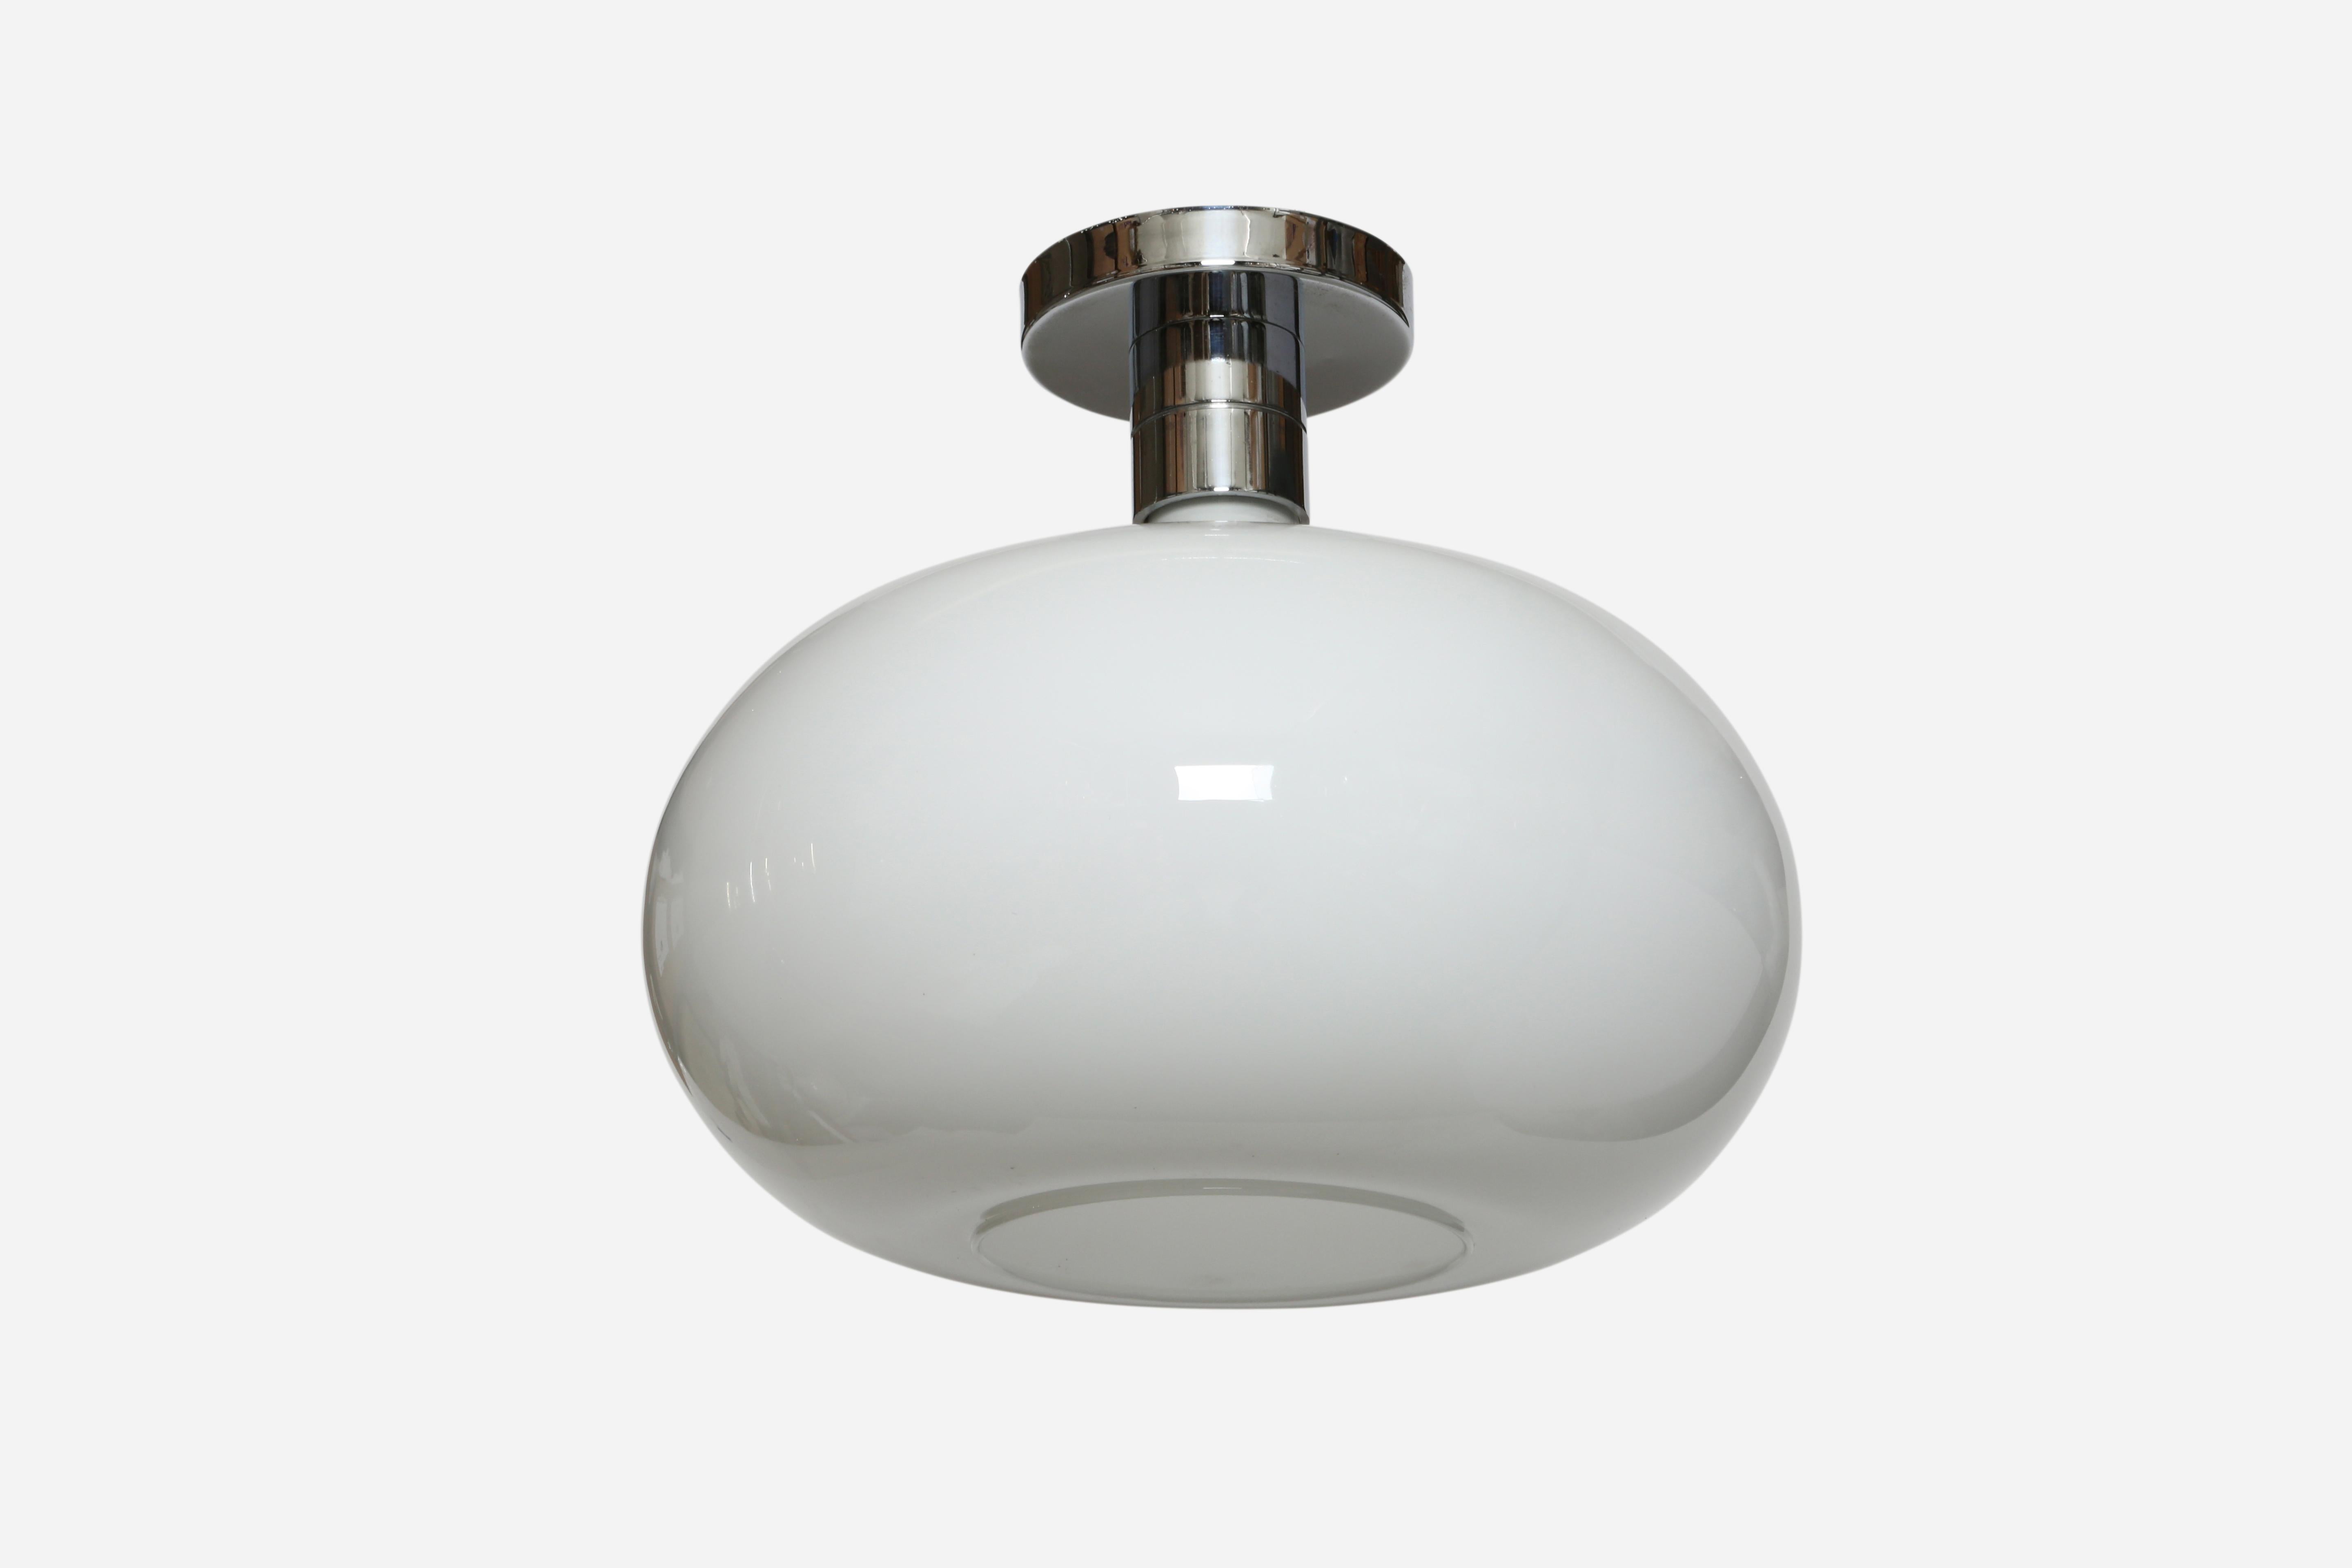 Franco Albini & Franca Helg for Sirrah AM/AS ceiling light.
Model AM5N
Designed and manufactured in Italy, 1960s.
Handblown glass and chrome plated metal.
One medium base socket.
Complimentary US rewiring upon request.